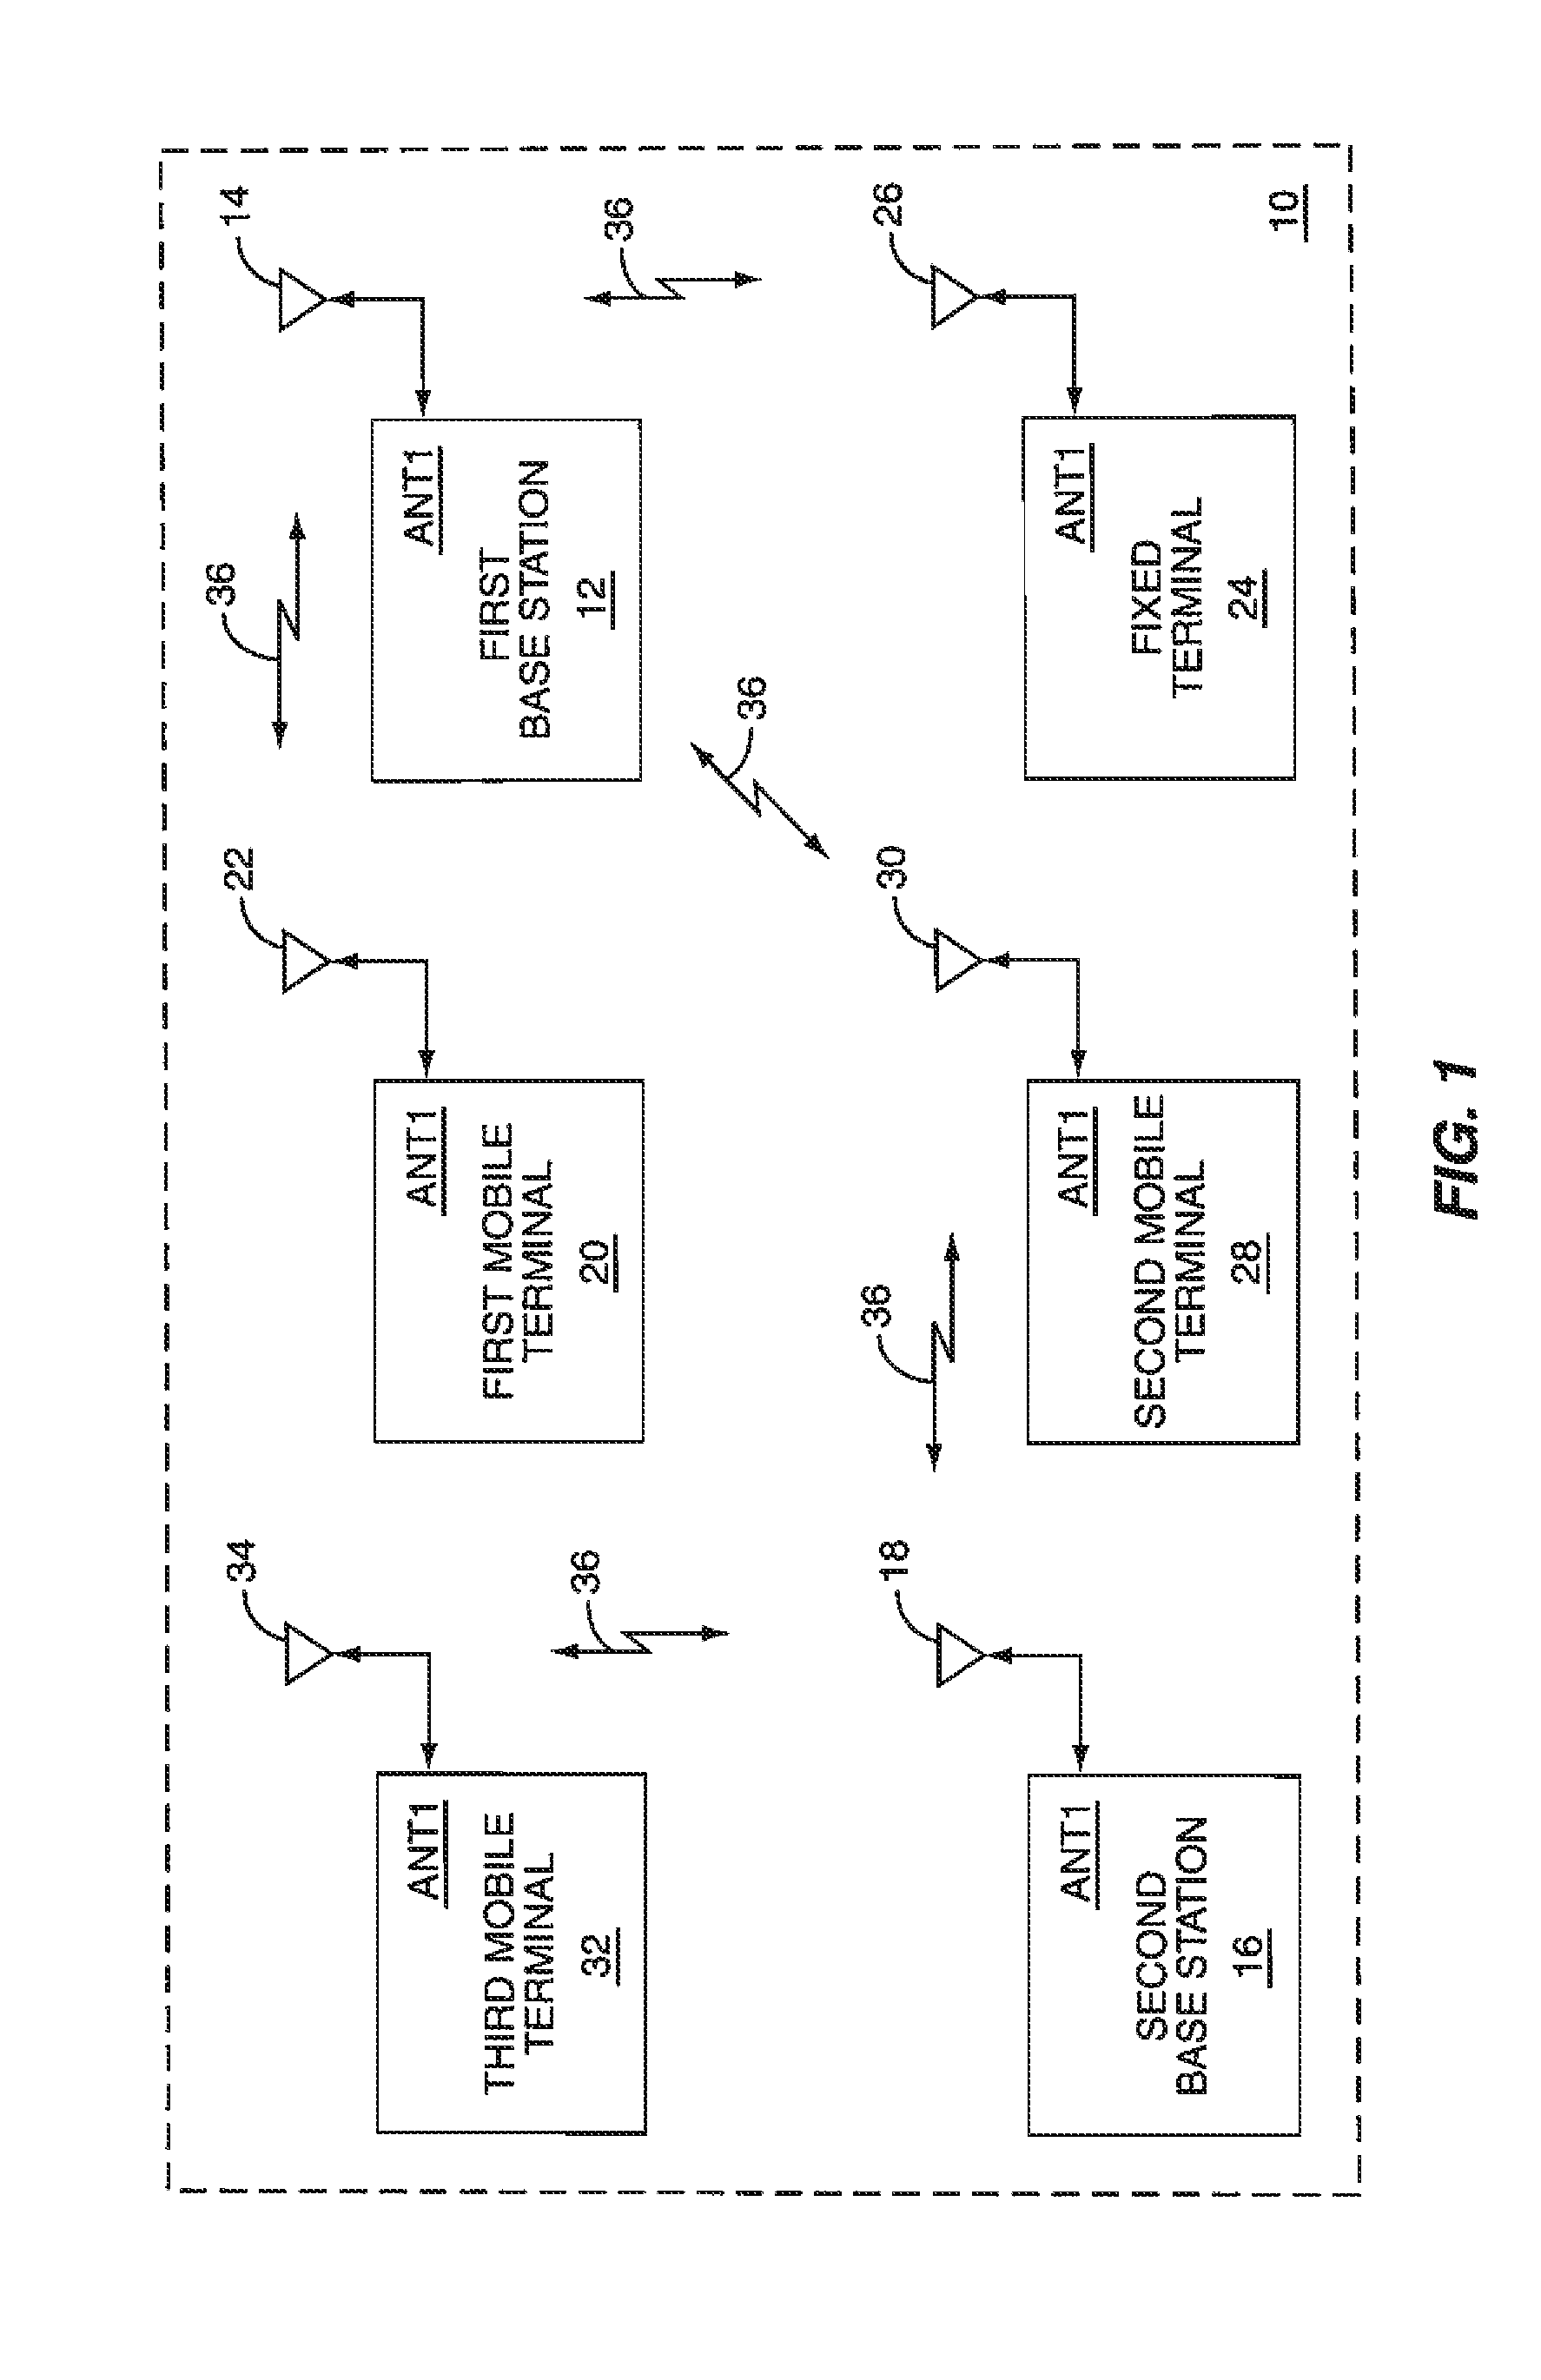 Modulation division multiple access